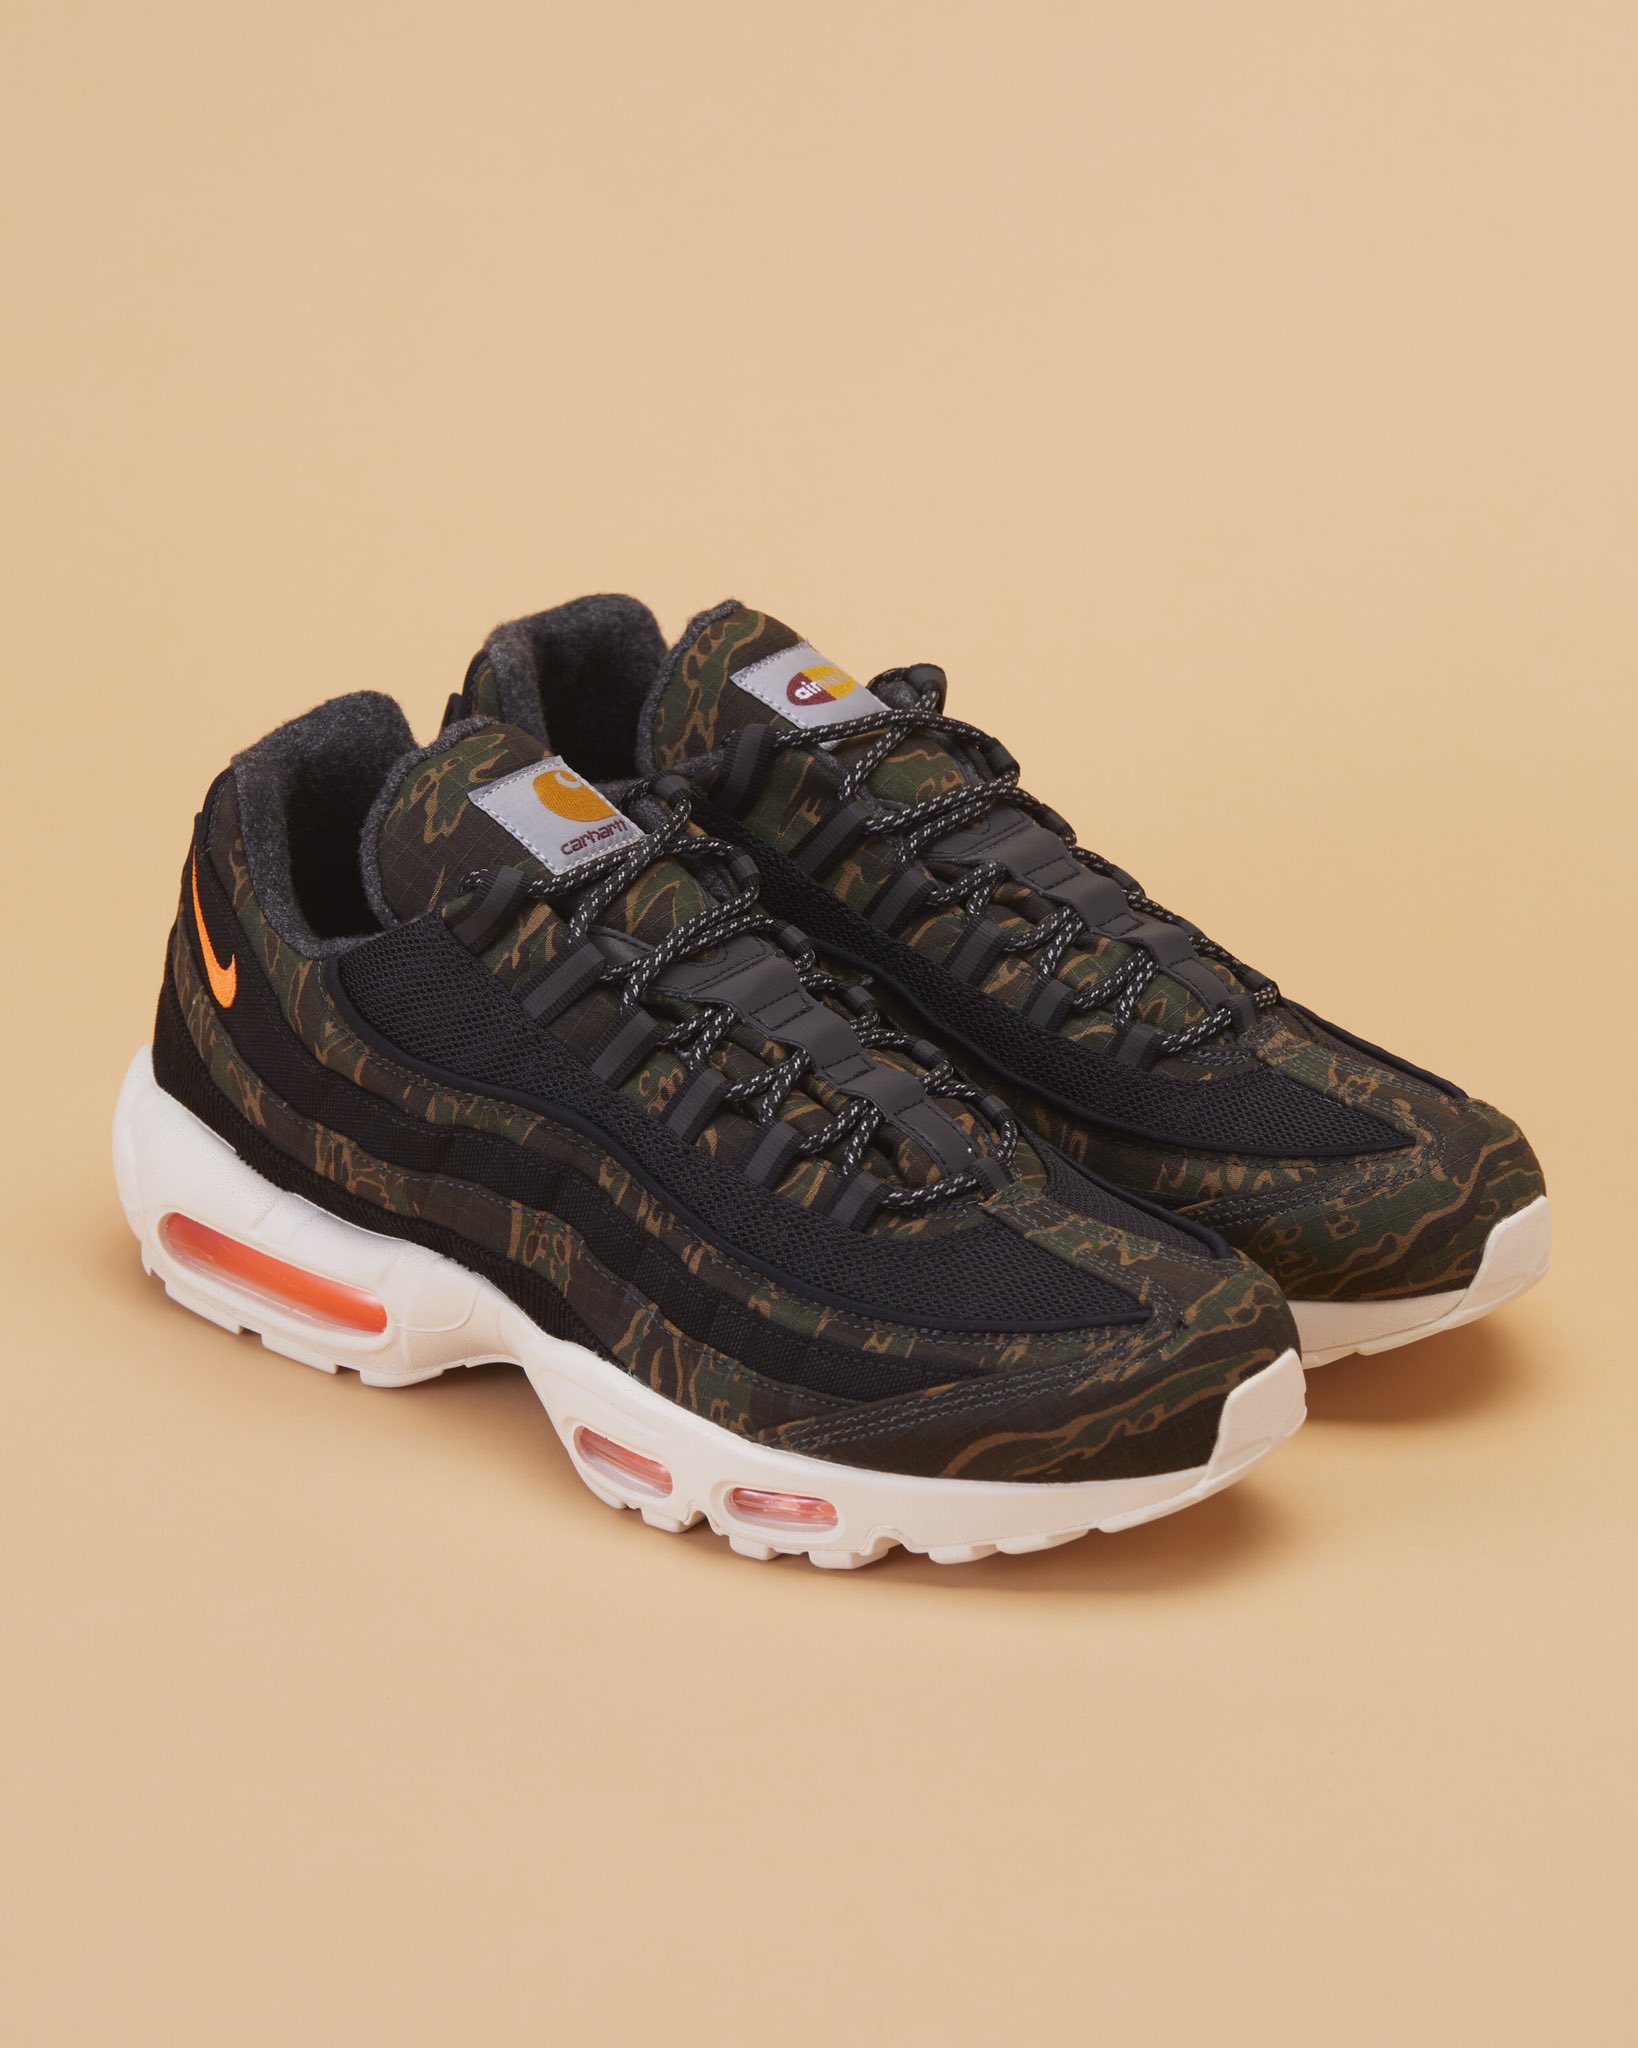 StockX Twitter: "Get your jungle grab these Air Max 95 Carhartt WIP Camo. https://t.co/dPWu3hZ5T4 https://t.co/a5Dh2yAmoS" / Twitter